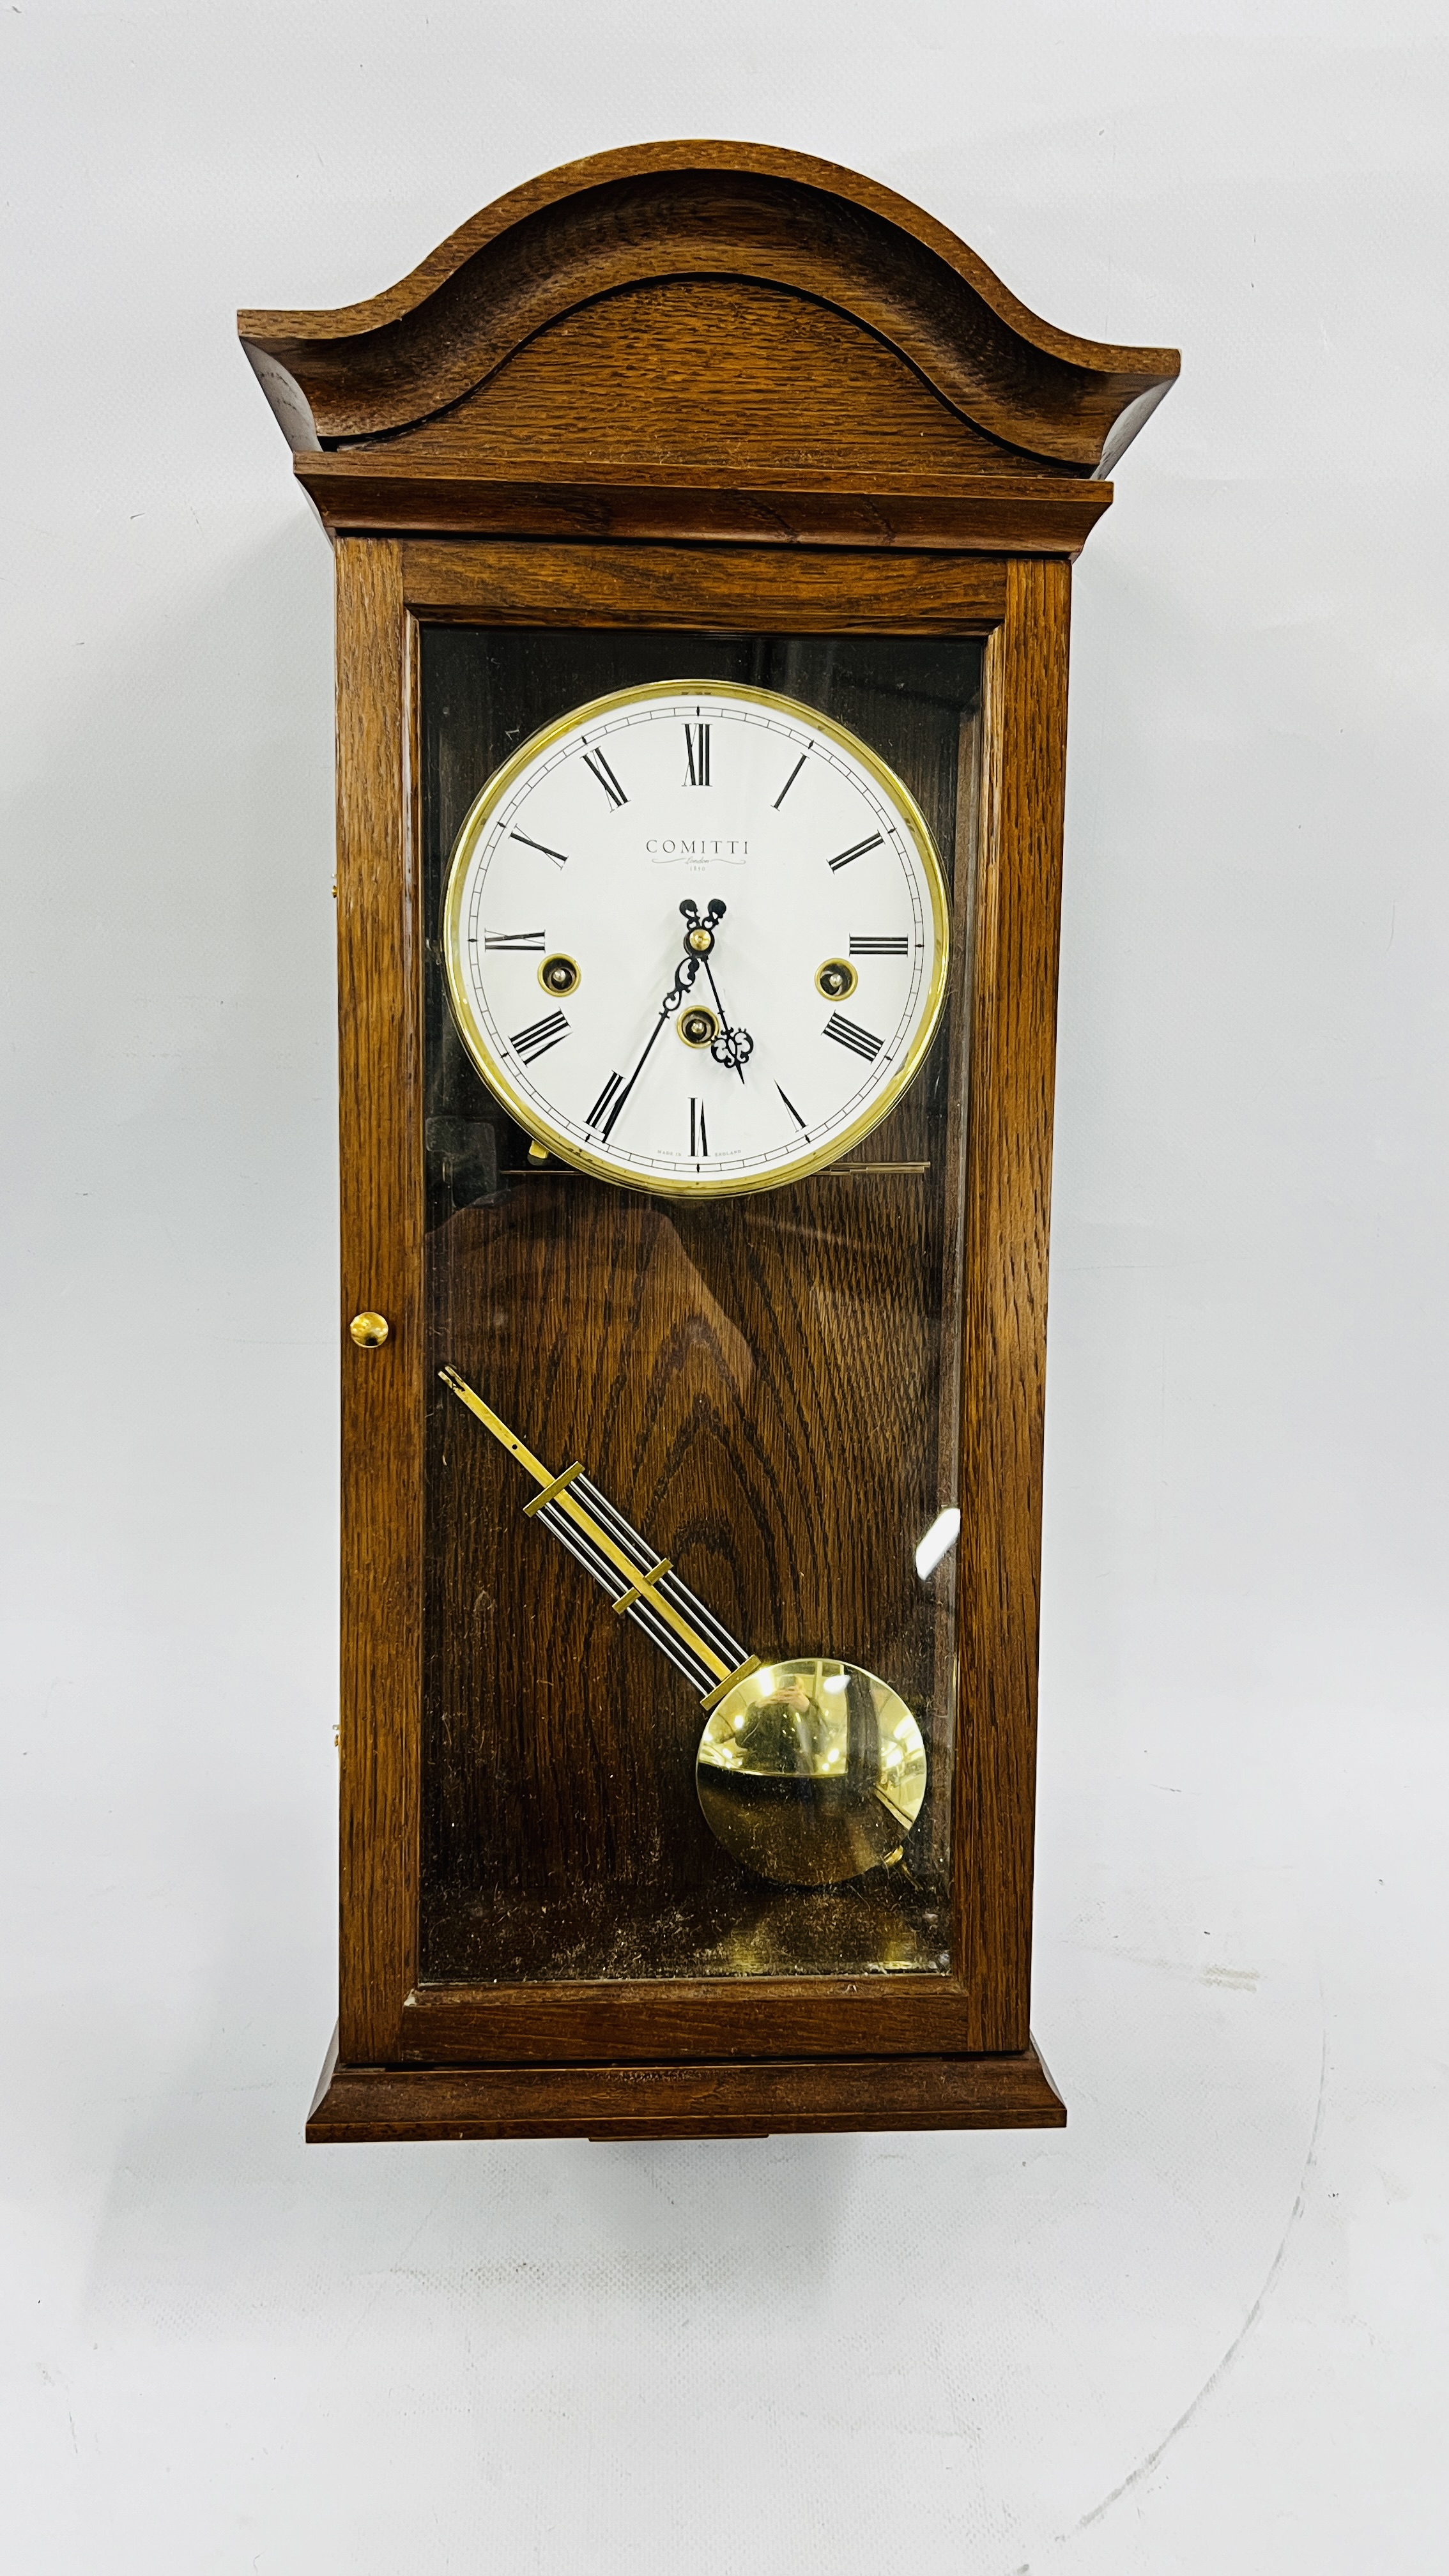 GOOD QUALITY REPRODUCTION WESTMINSTER CHIMING WALL CLOCK BY COMITTI OF LONDON, H 59CM.